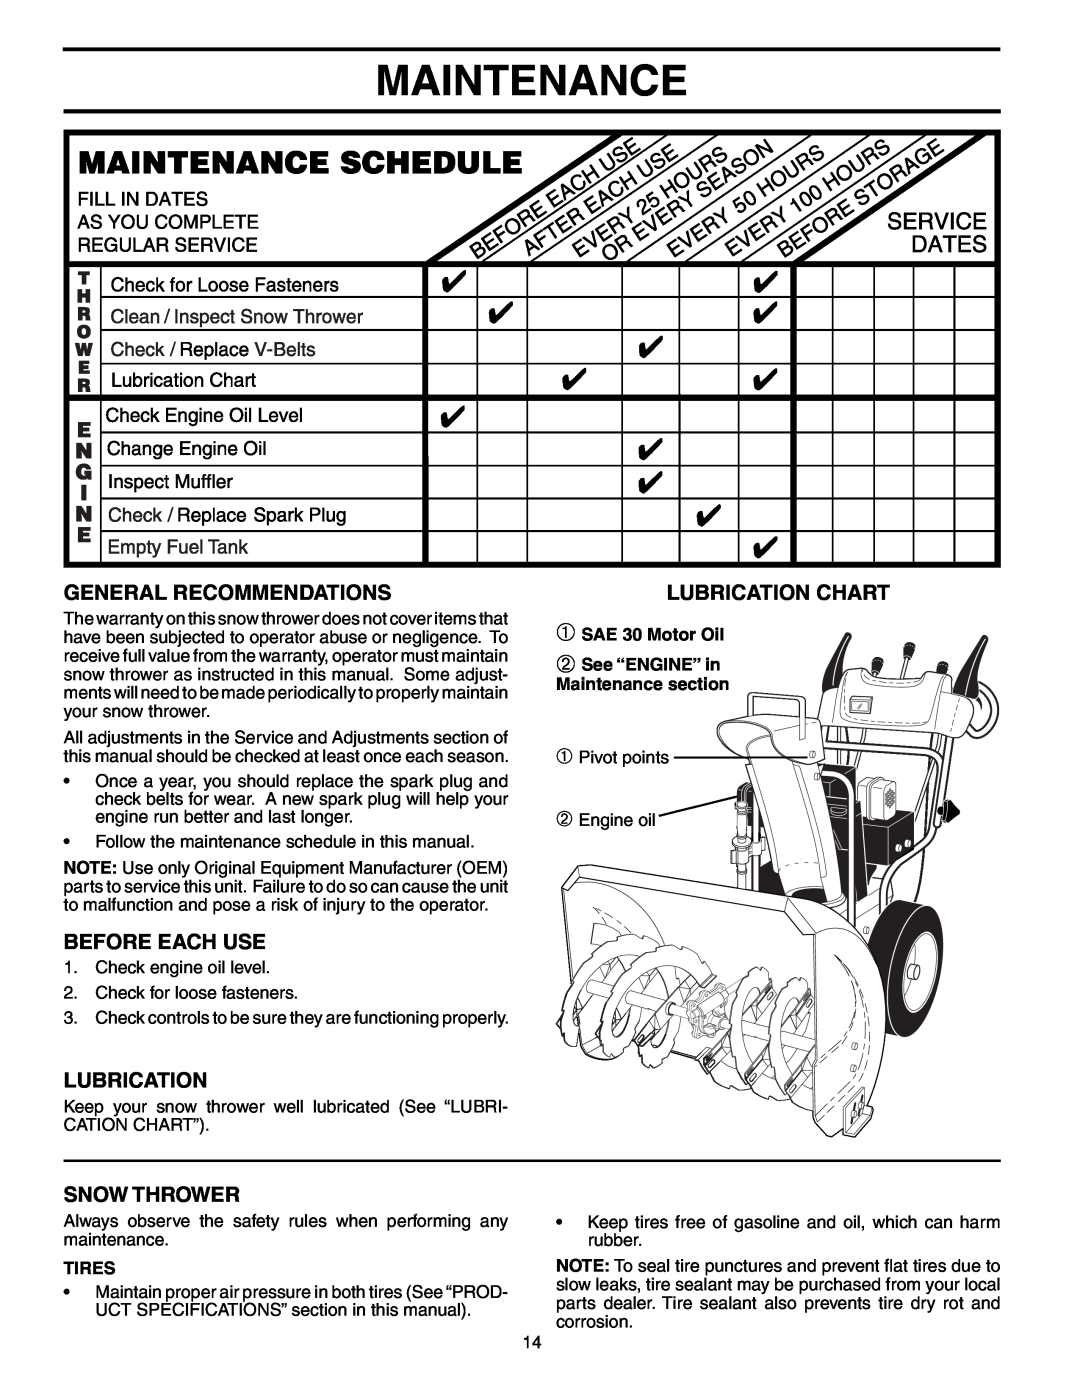 Poulan 192044 Maintenance, General Recommendations, Before Each Use, Snow Thrower, Lubrication Chart, Tires 